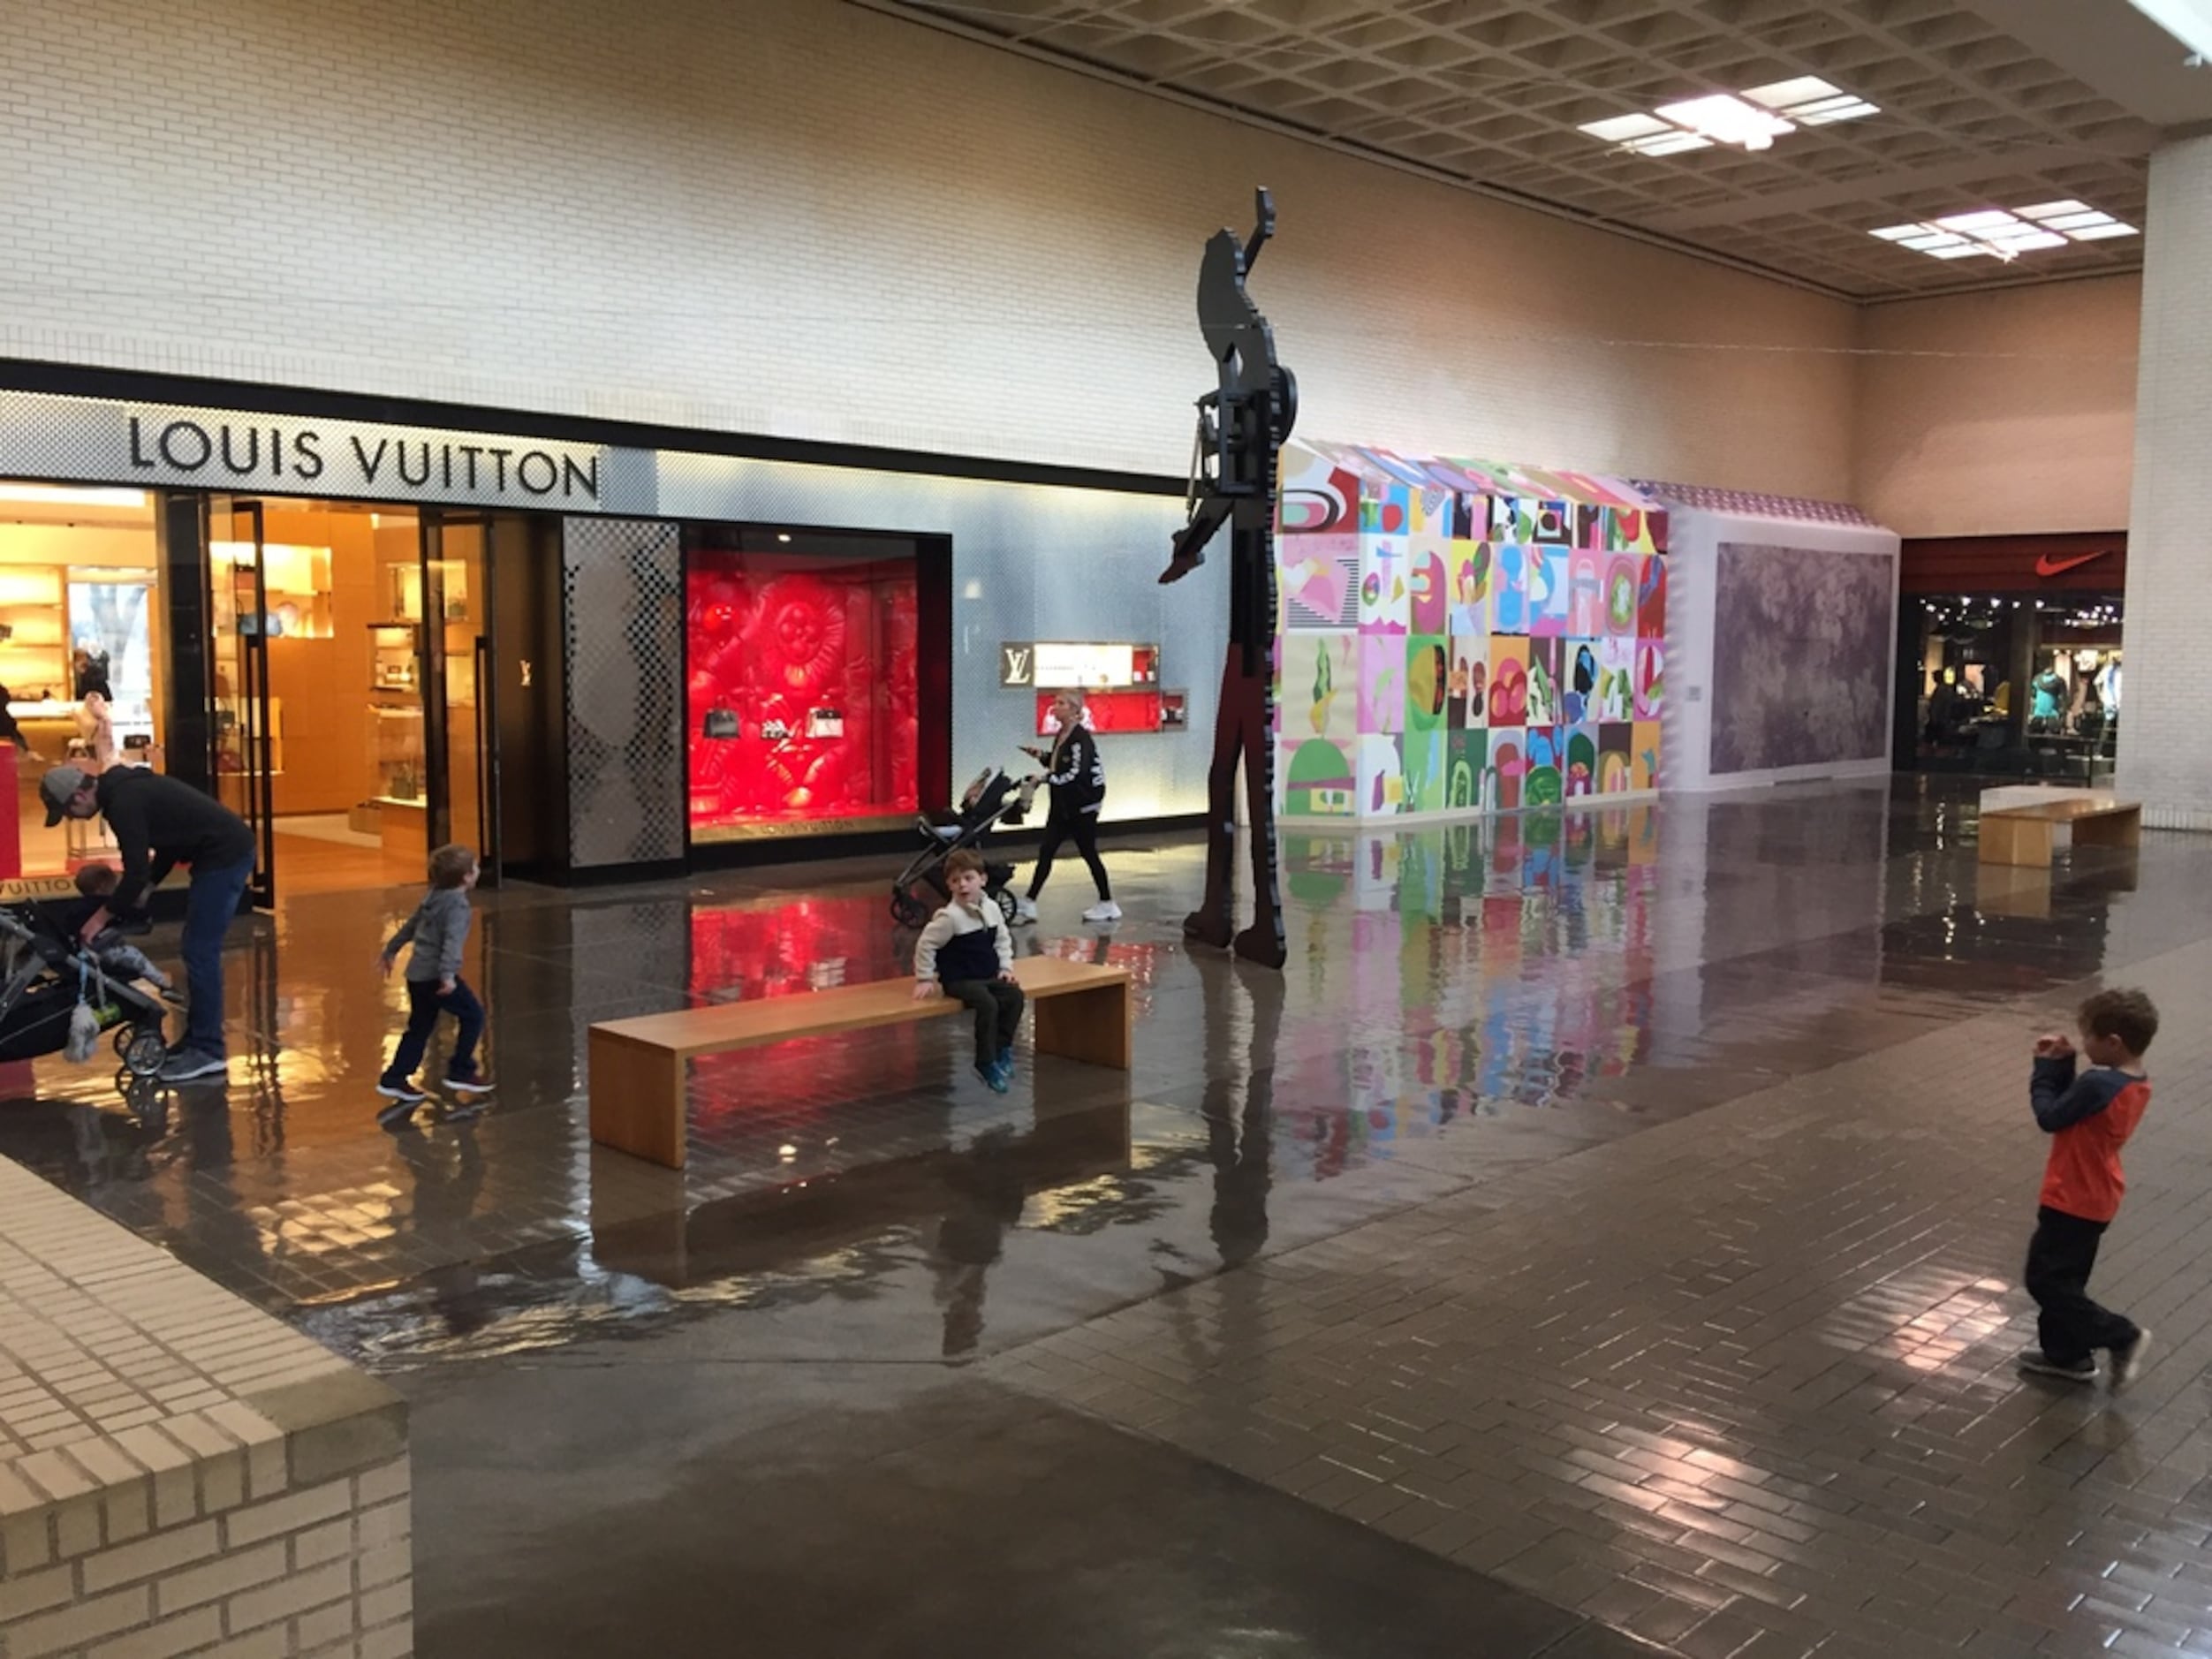 Louis Vuitton has doubled its space at NorthPark, making it way more than a  handbag store